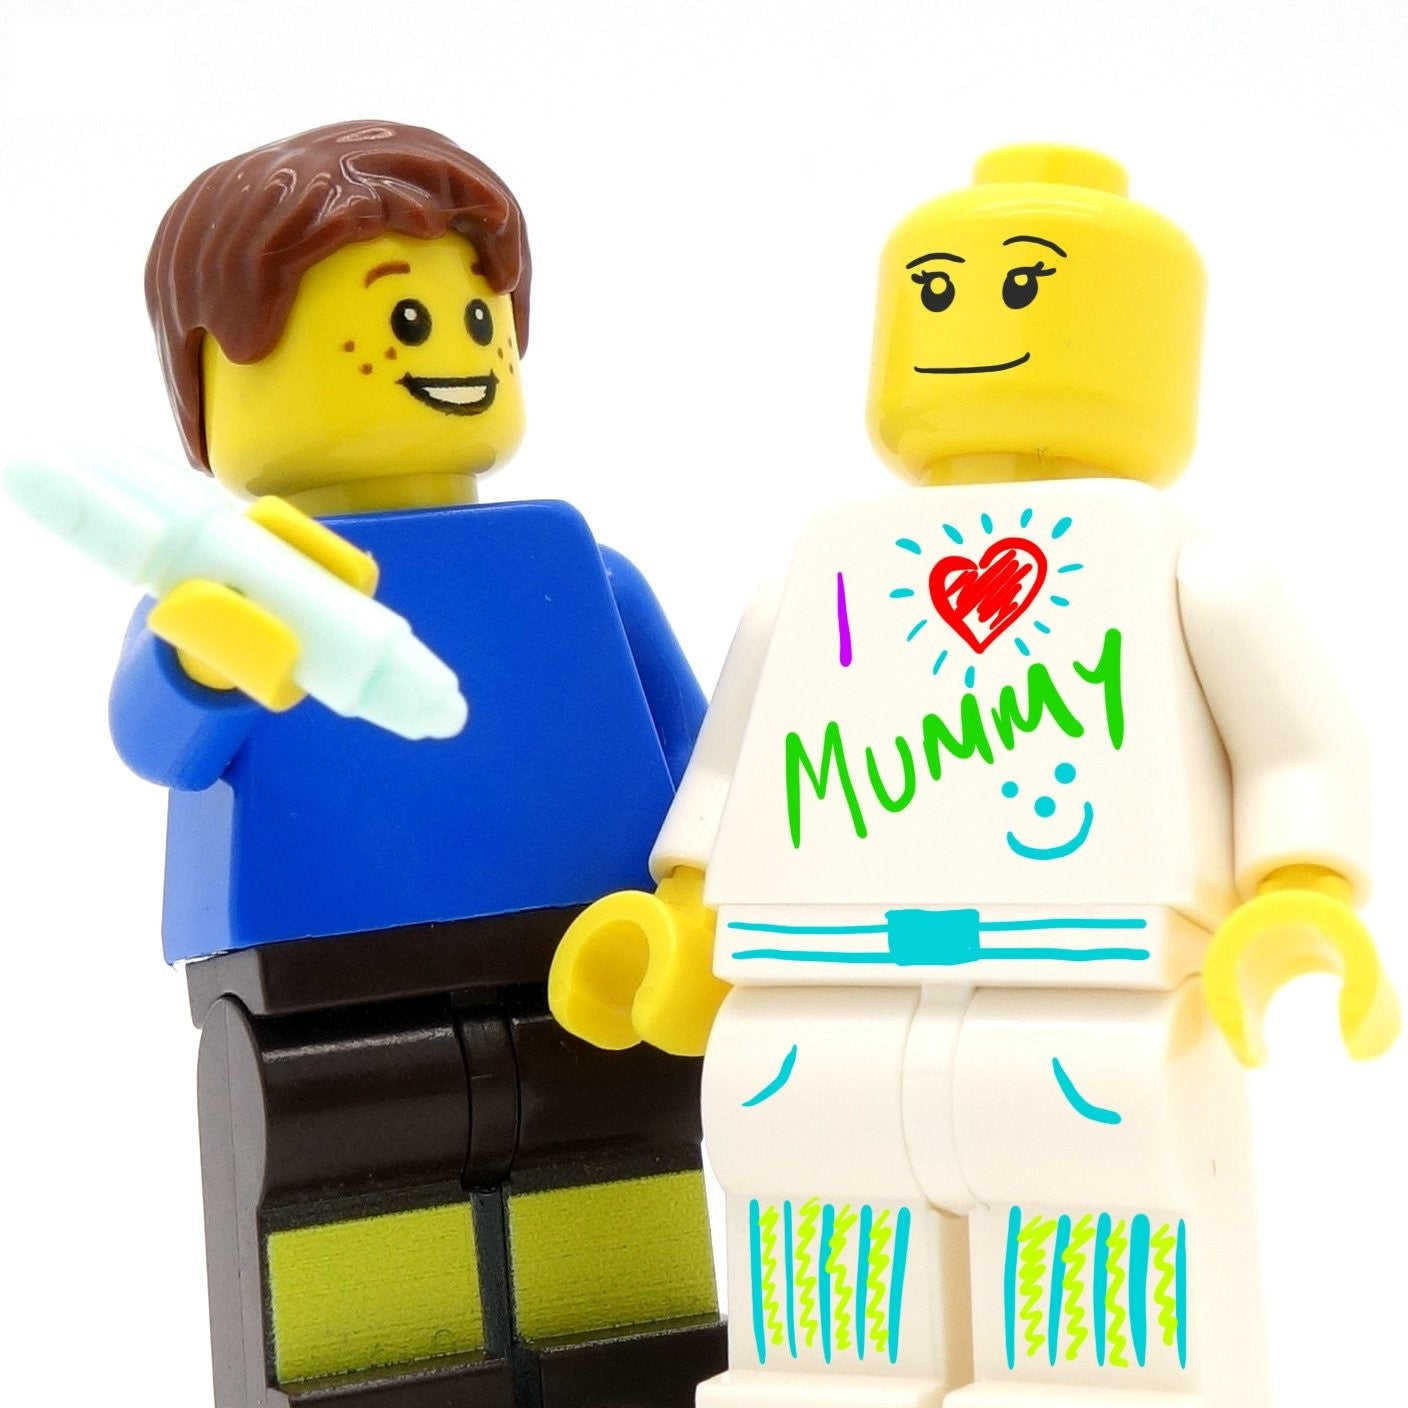 Doodle Your Own Minifigure Draw Your Own Custom Printed Minifigur